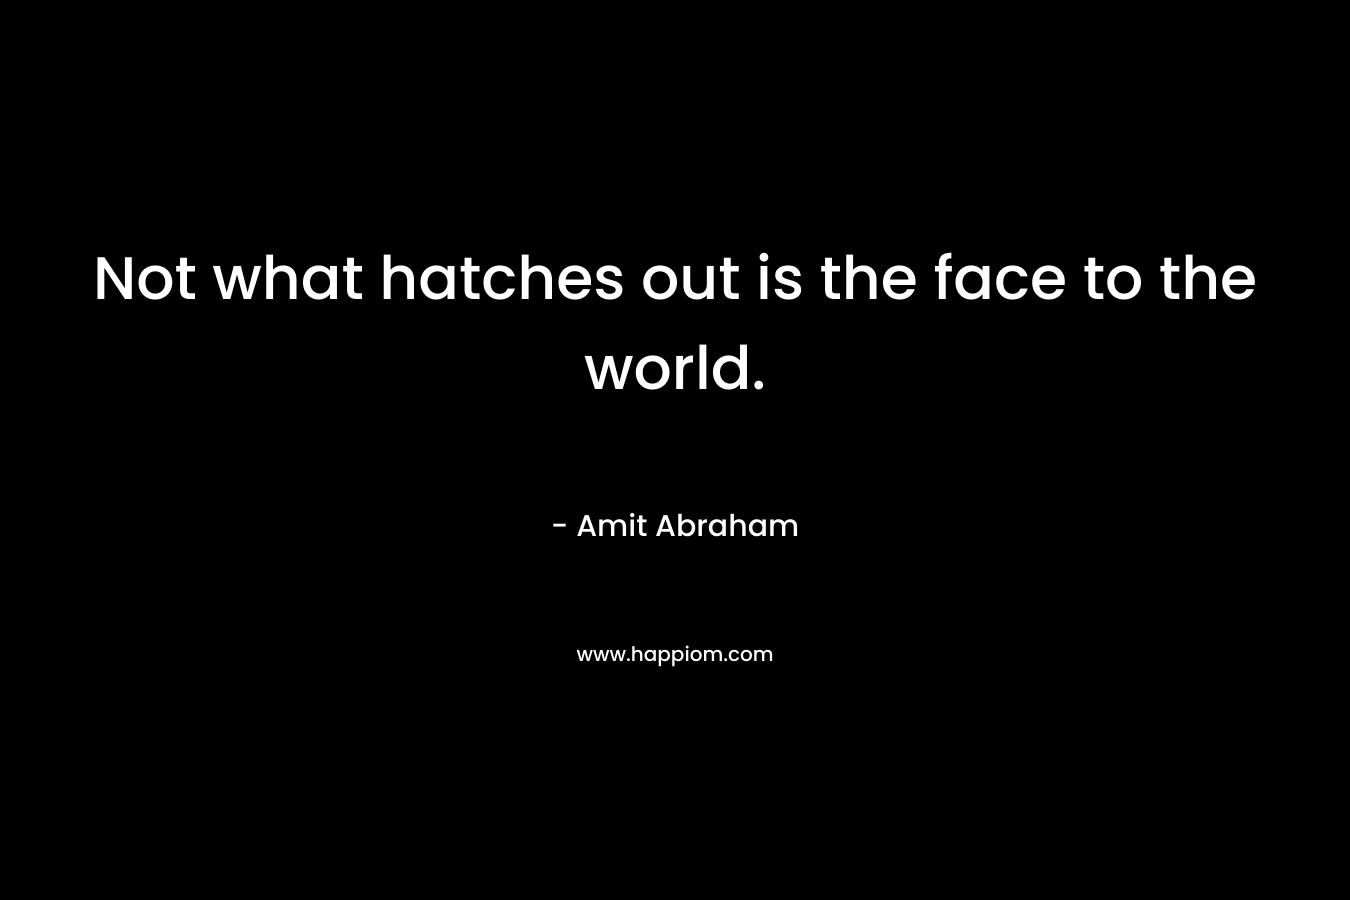 Not what hatches out is the face to the world.